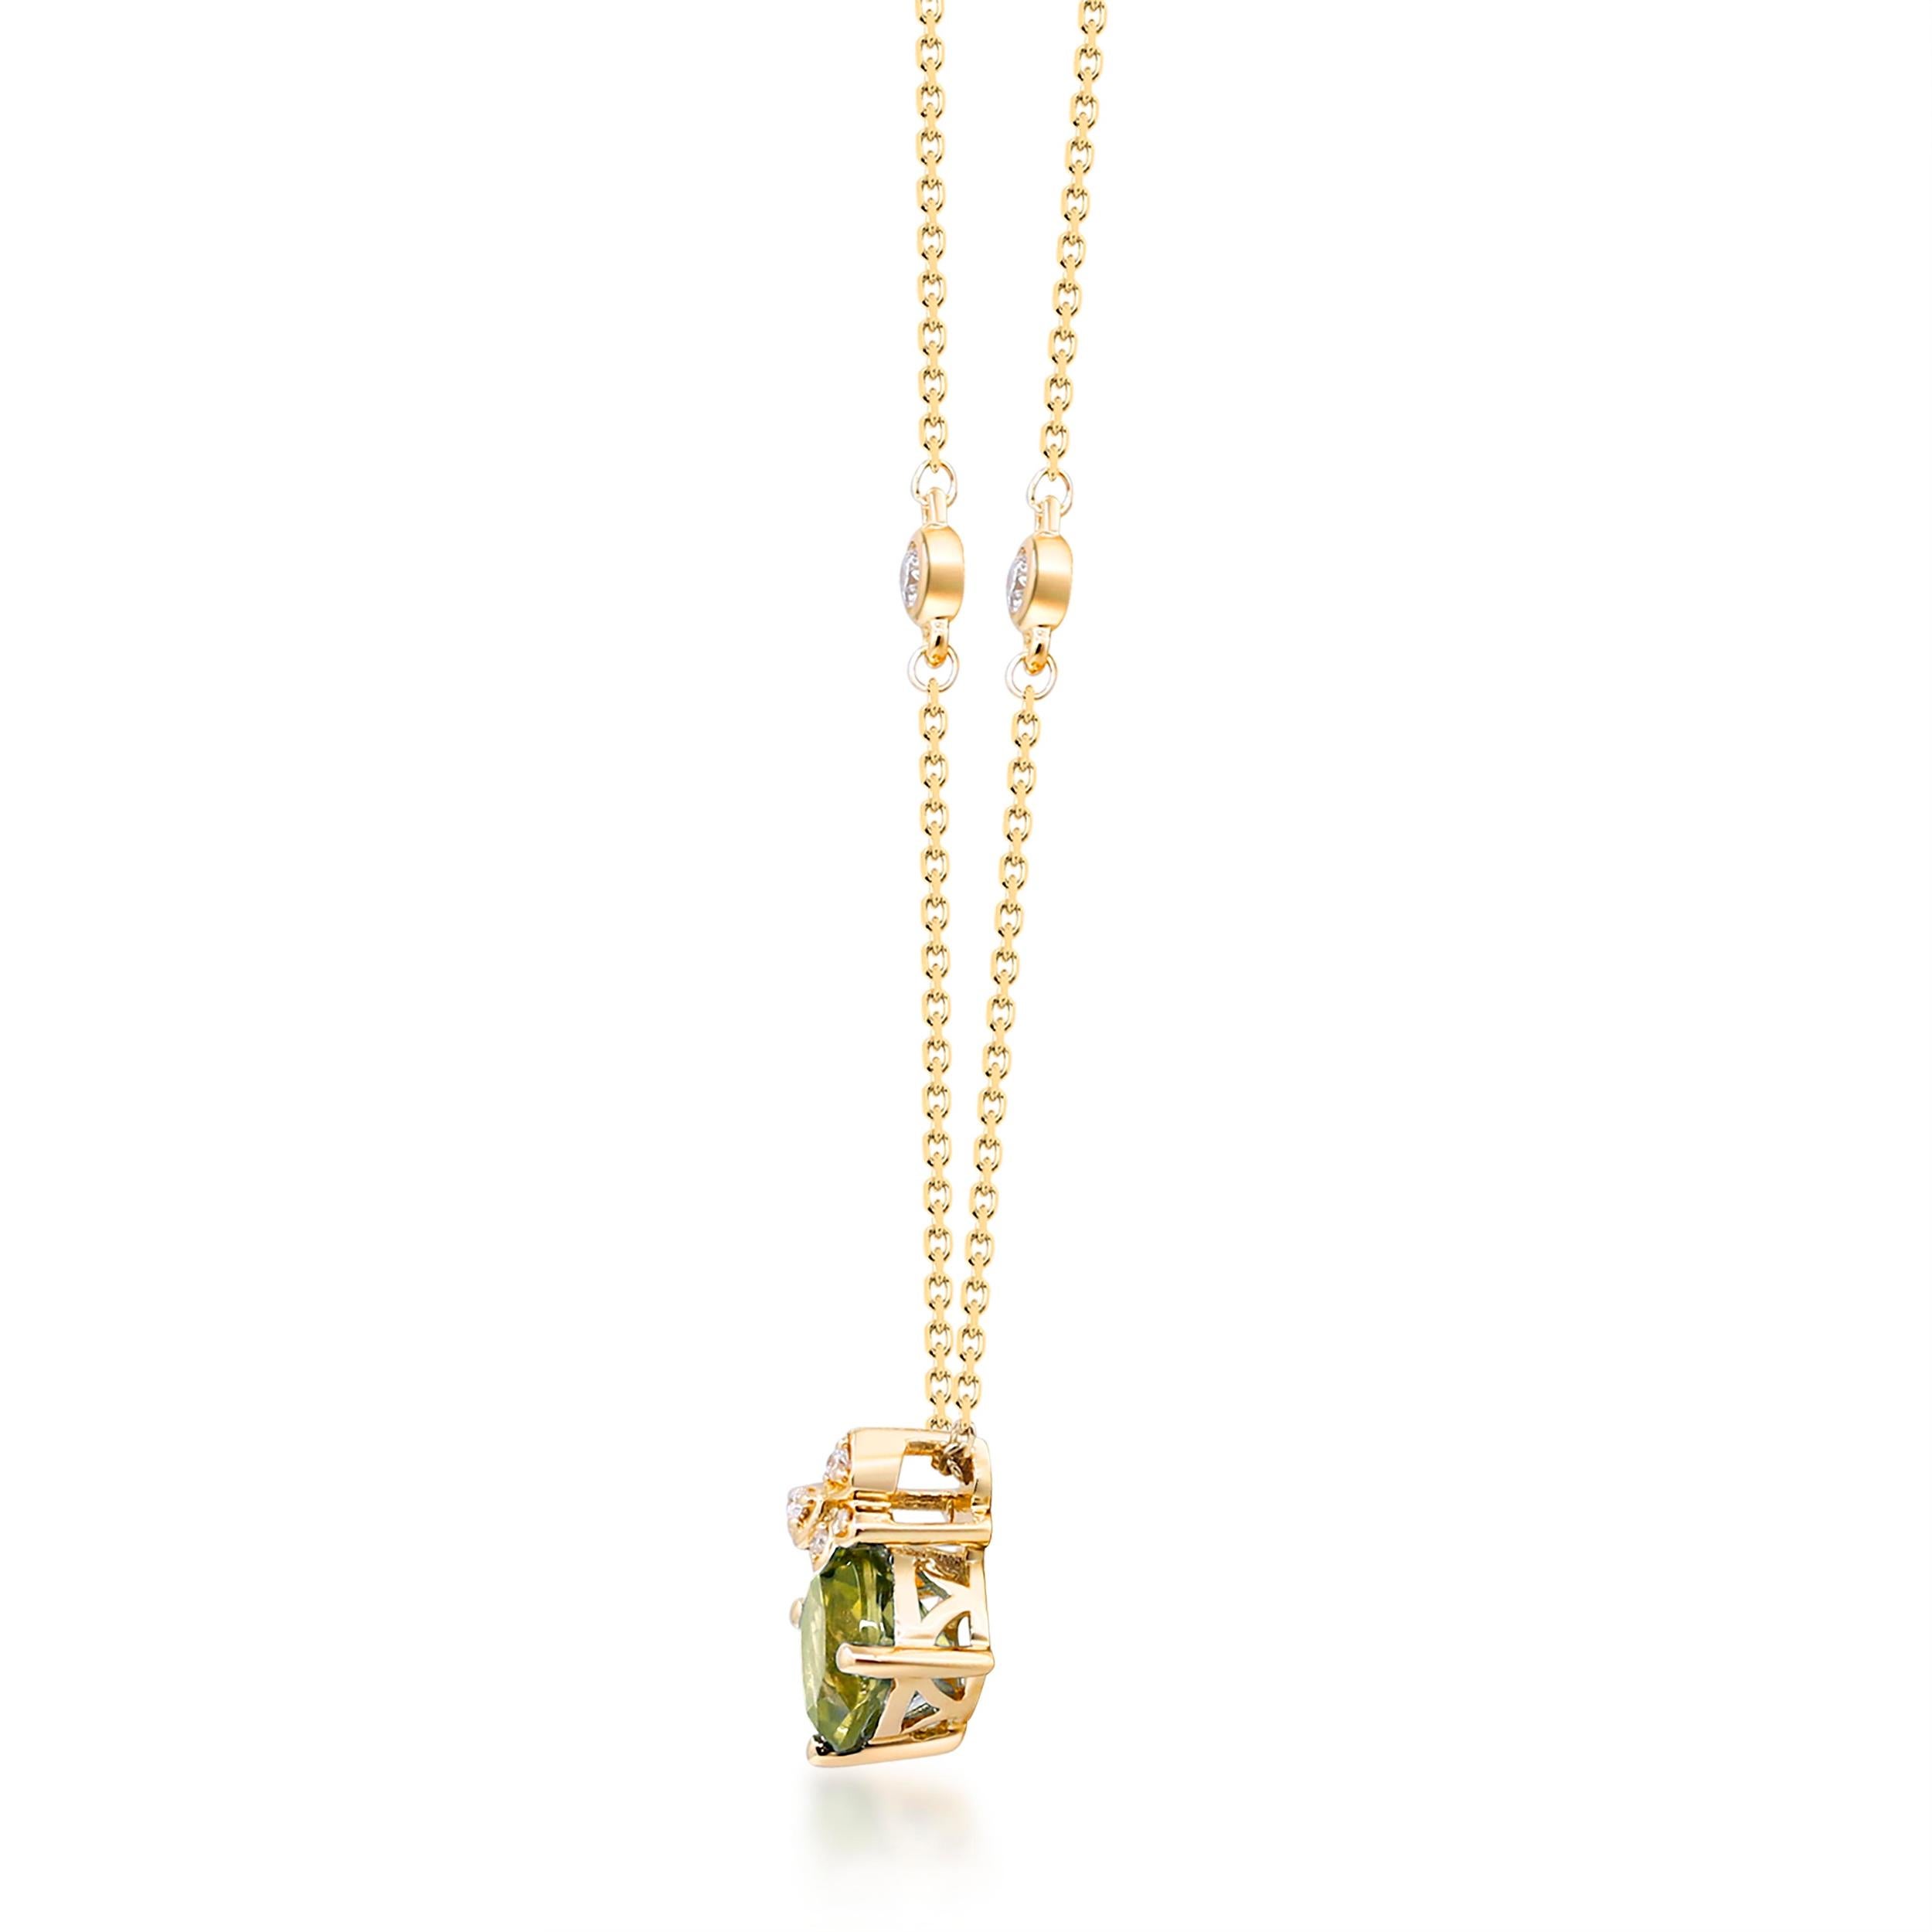 Decorate yourself in elegance with this Pendant is crafted from 10-karat Yellow Gold by Gin & Grace. This Pendant is made up of 6.0 mm Cushion-Cut Peridot (1 pcs) 0.99 carat and Round-cut White Diamond (4 Pcs) 0.02 Carat. This Pendant is weight 1.86